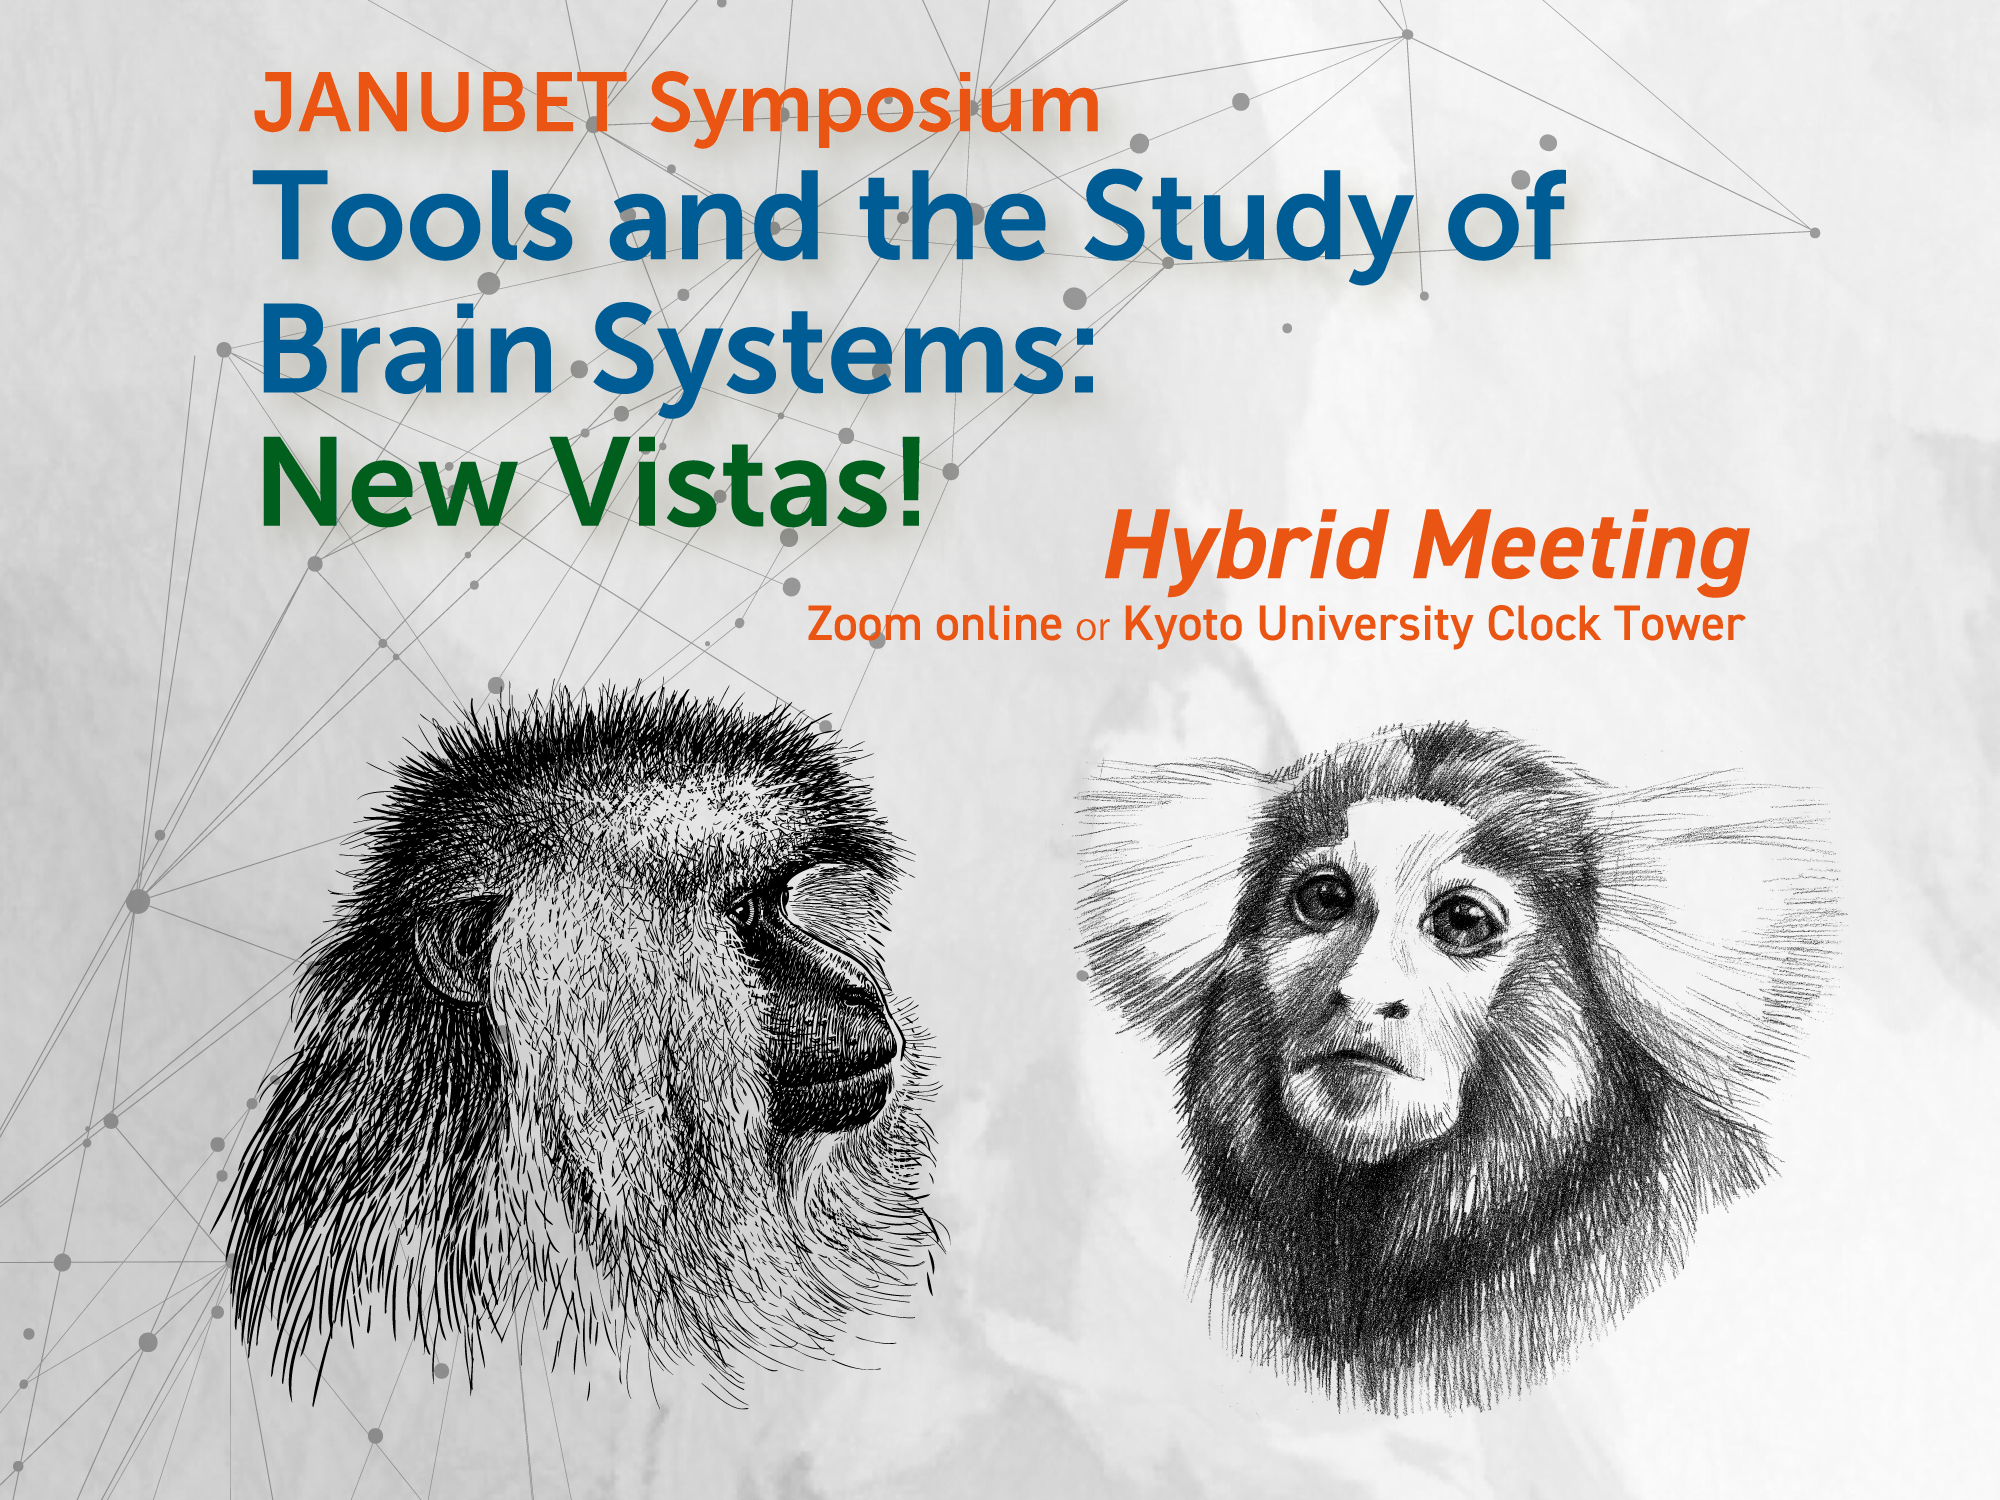 JANUBET Symposium “Tools and the Study of Brain Systems: New Vistas!”